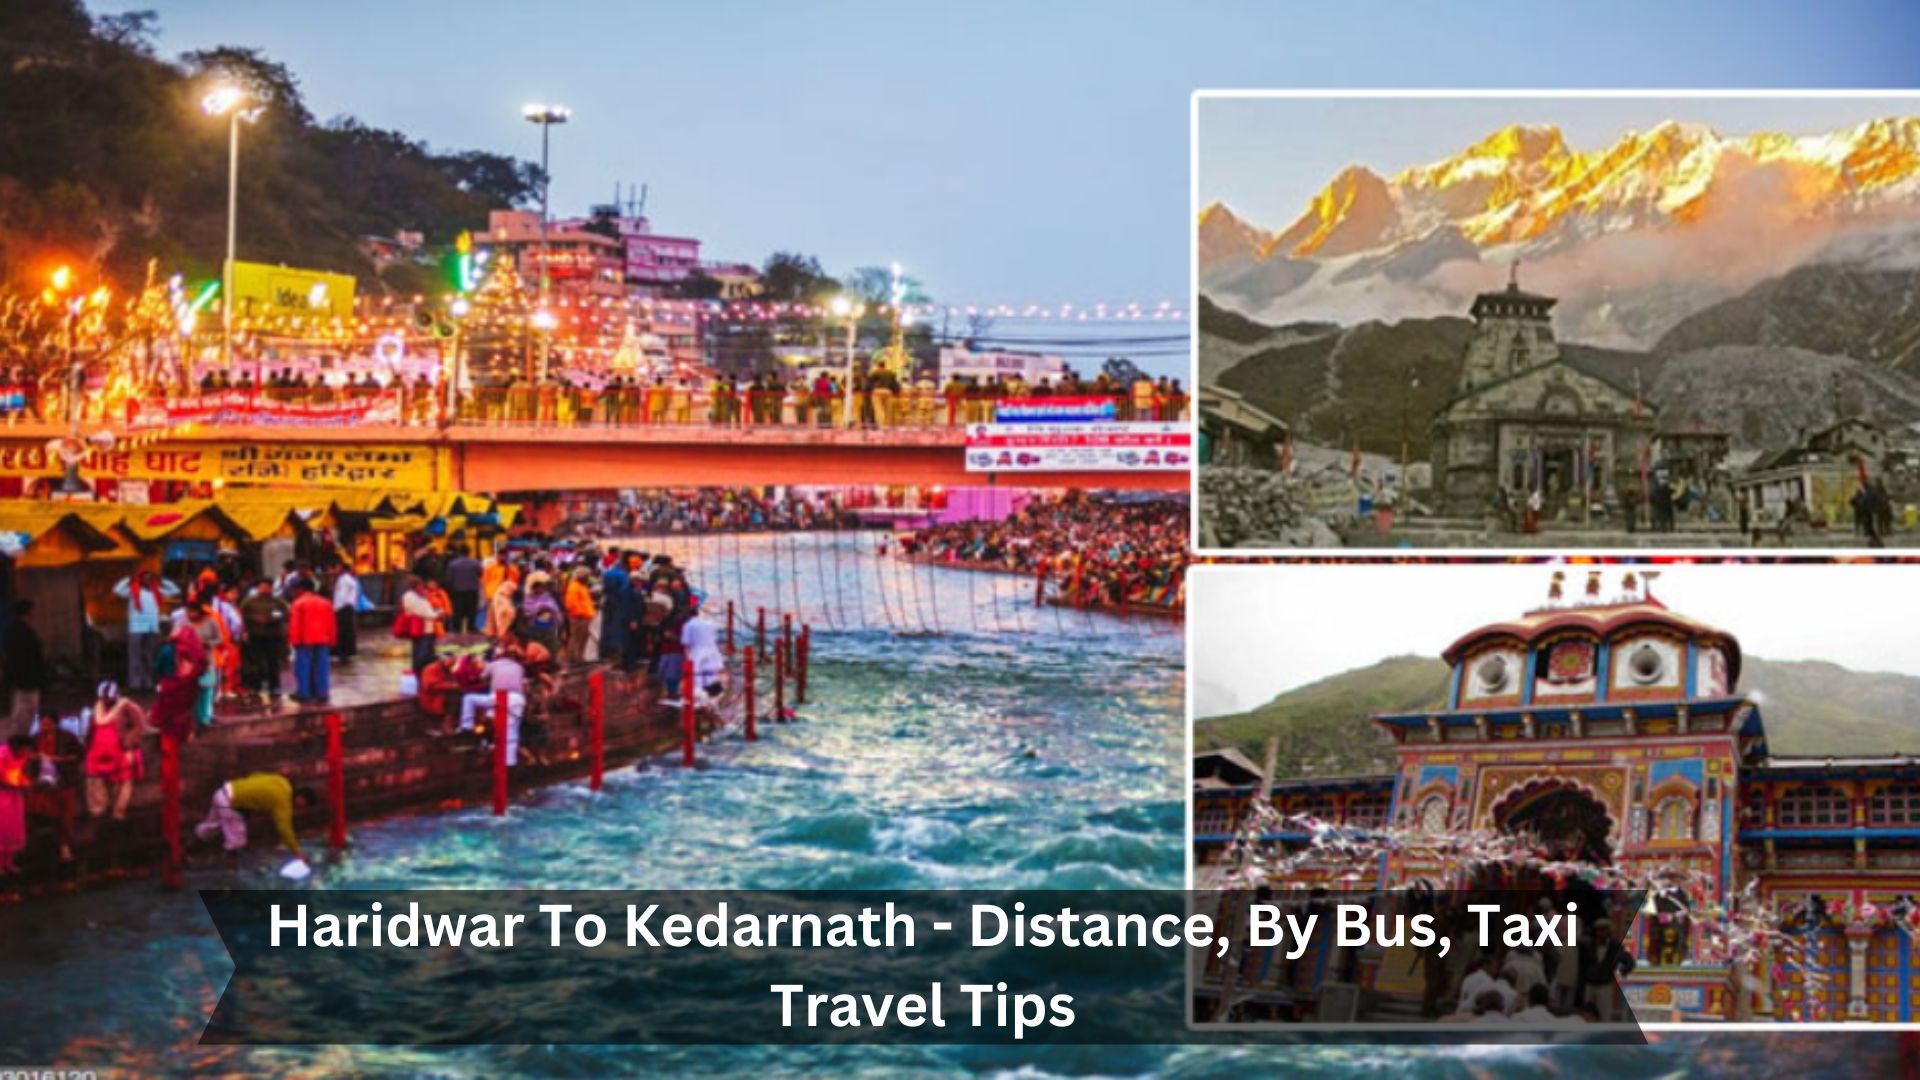 Haridwar-To-Kedarnath-Distance-By-Bus-Taxi-Travel-Tips